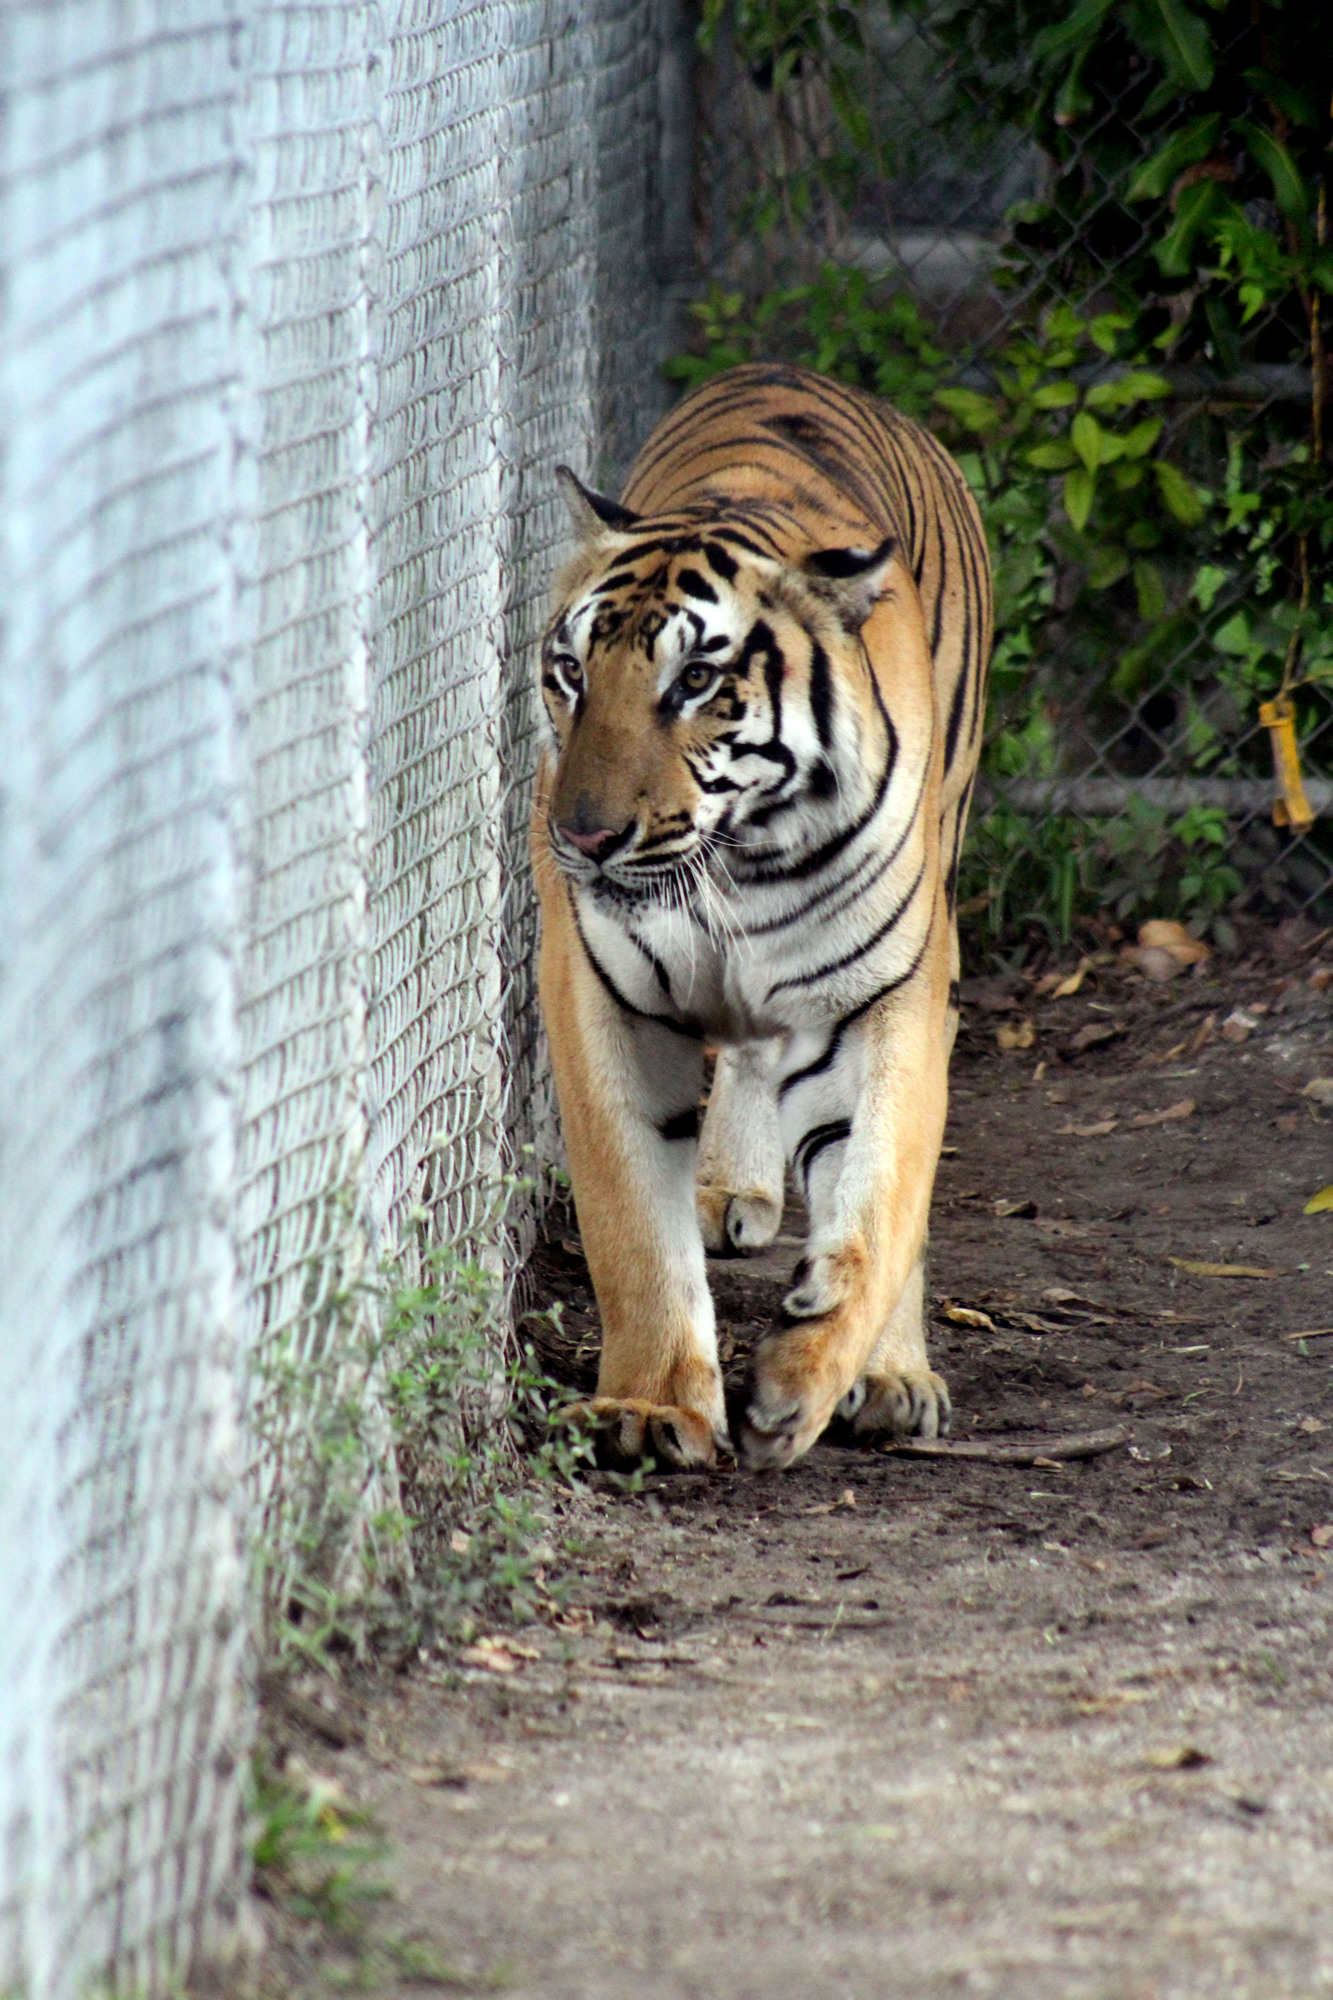 The sanctuary is home to 55 big cats. 